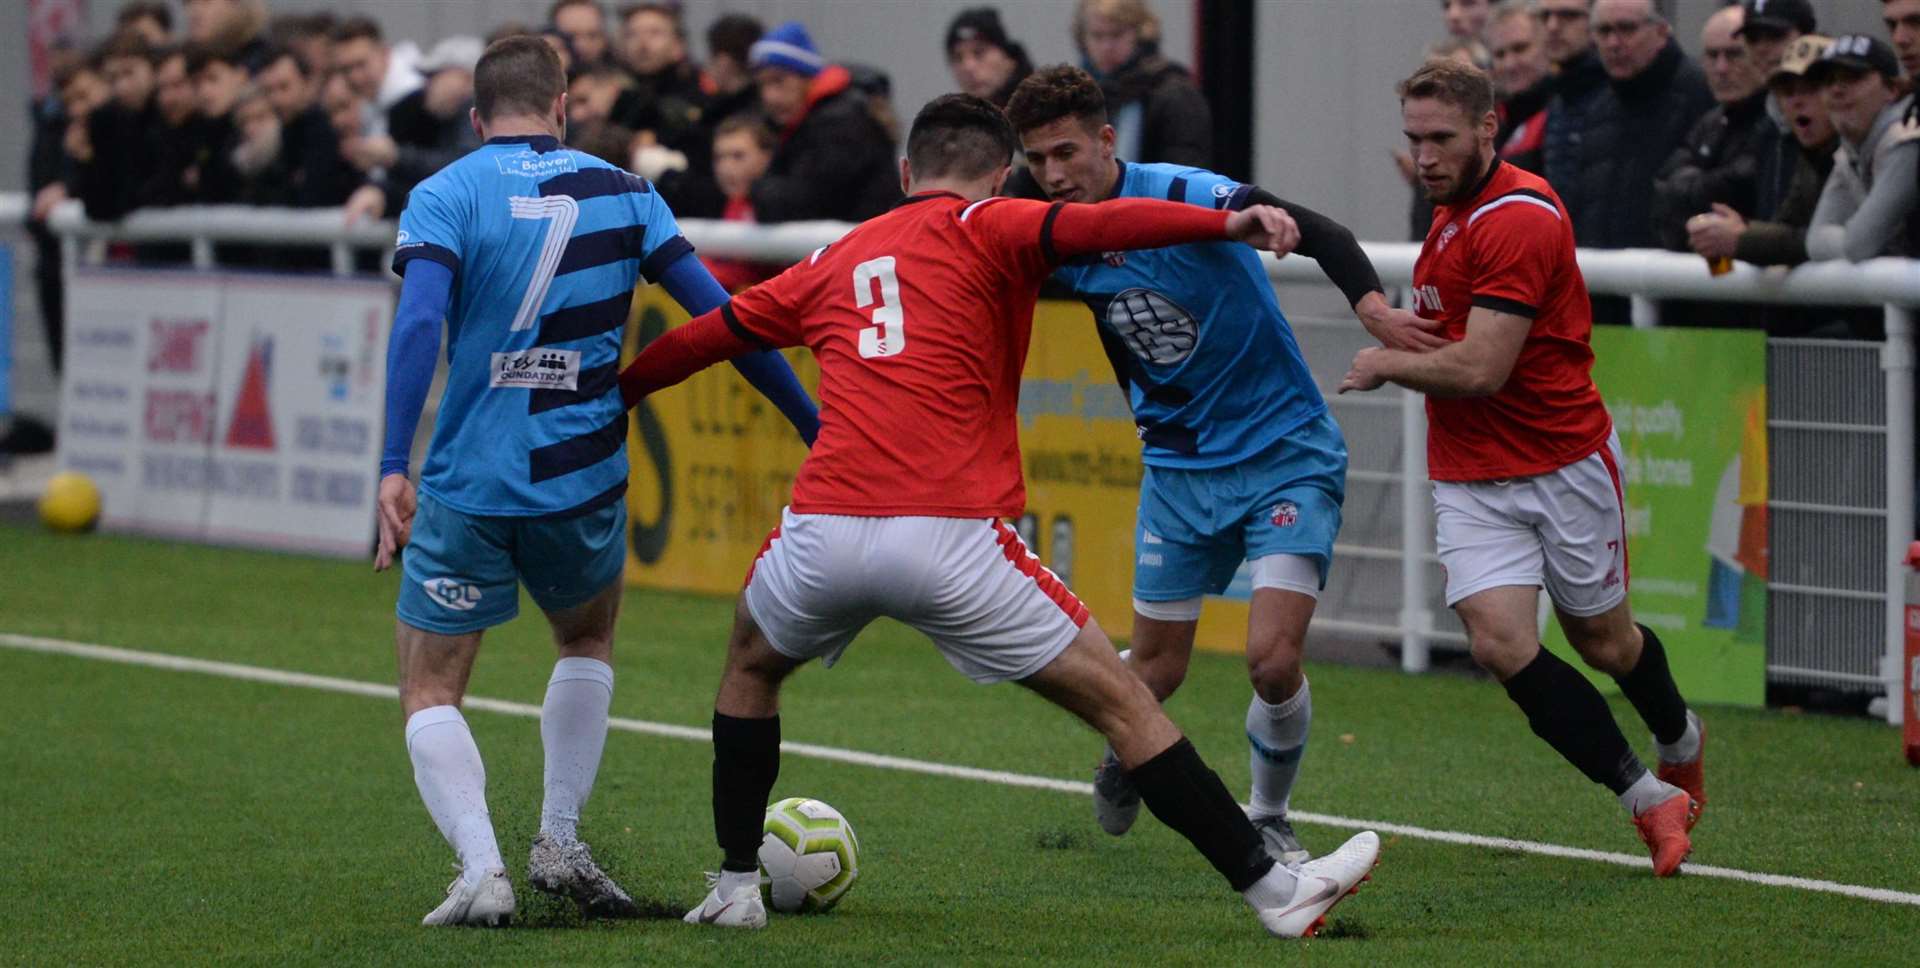 Sheppey take on Chatham in Saturday's game Picture: Chris Davey